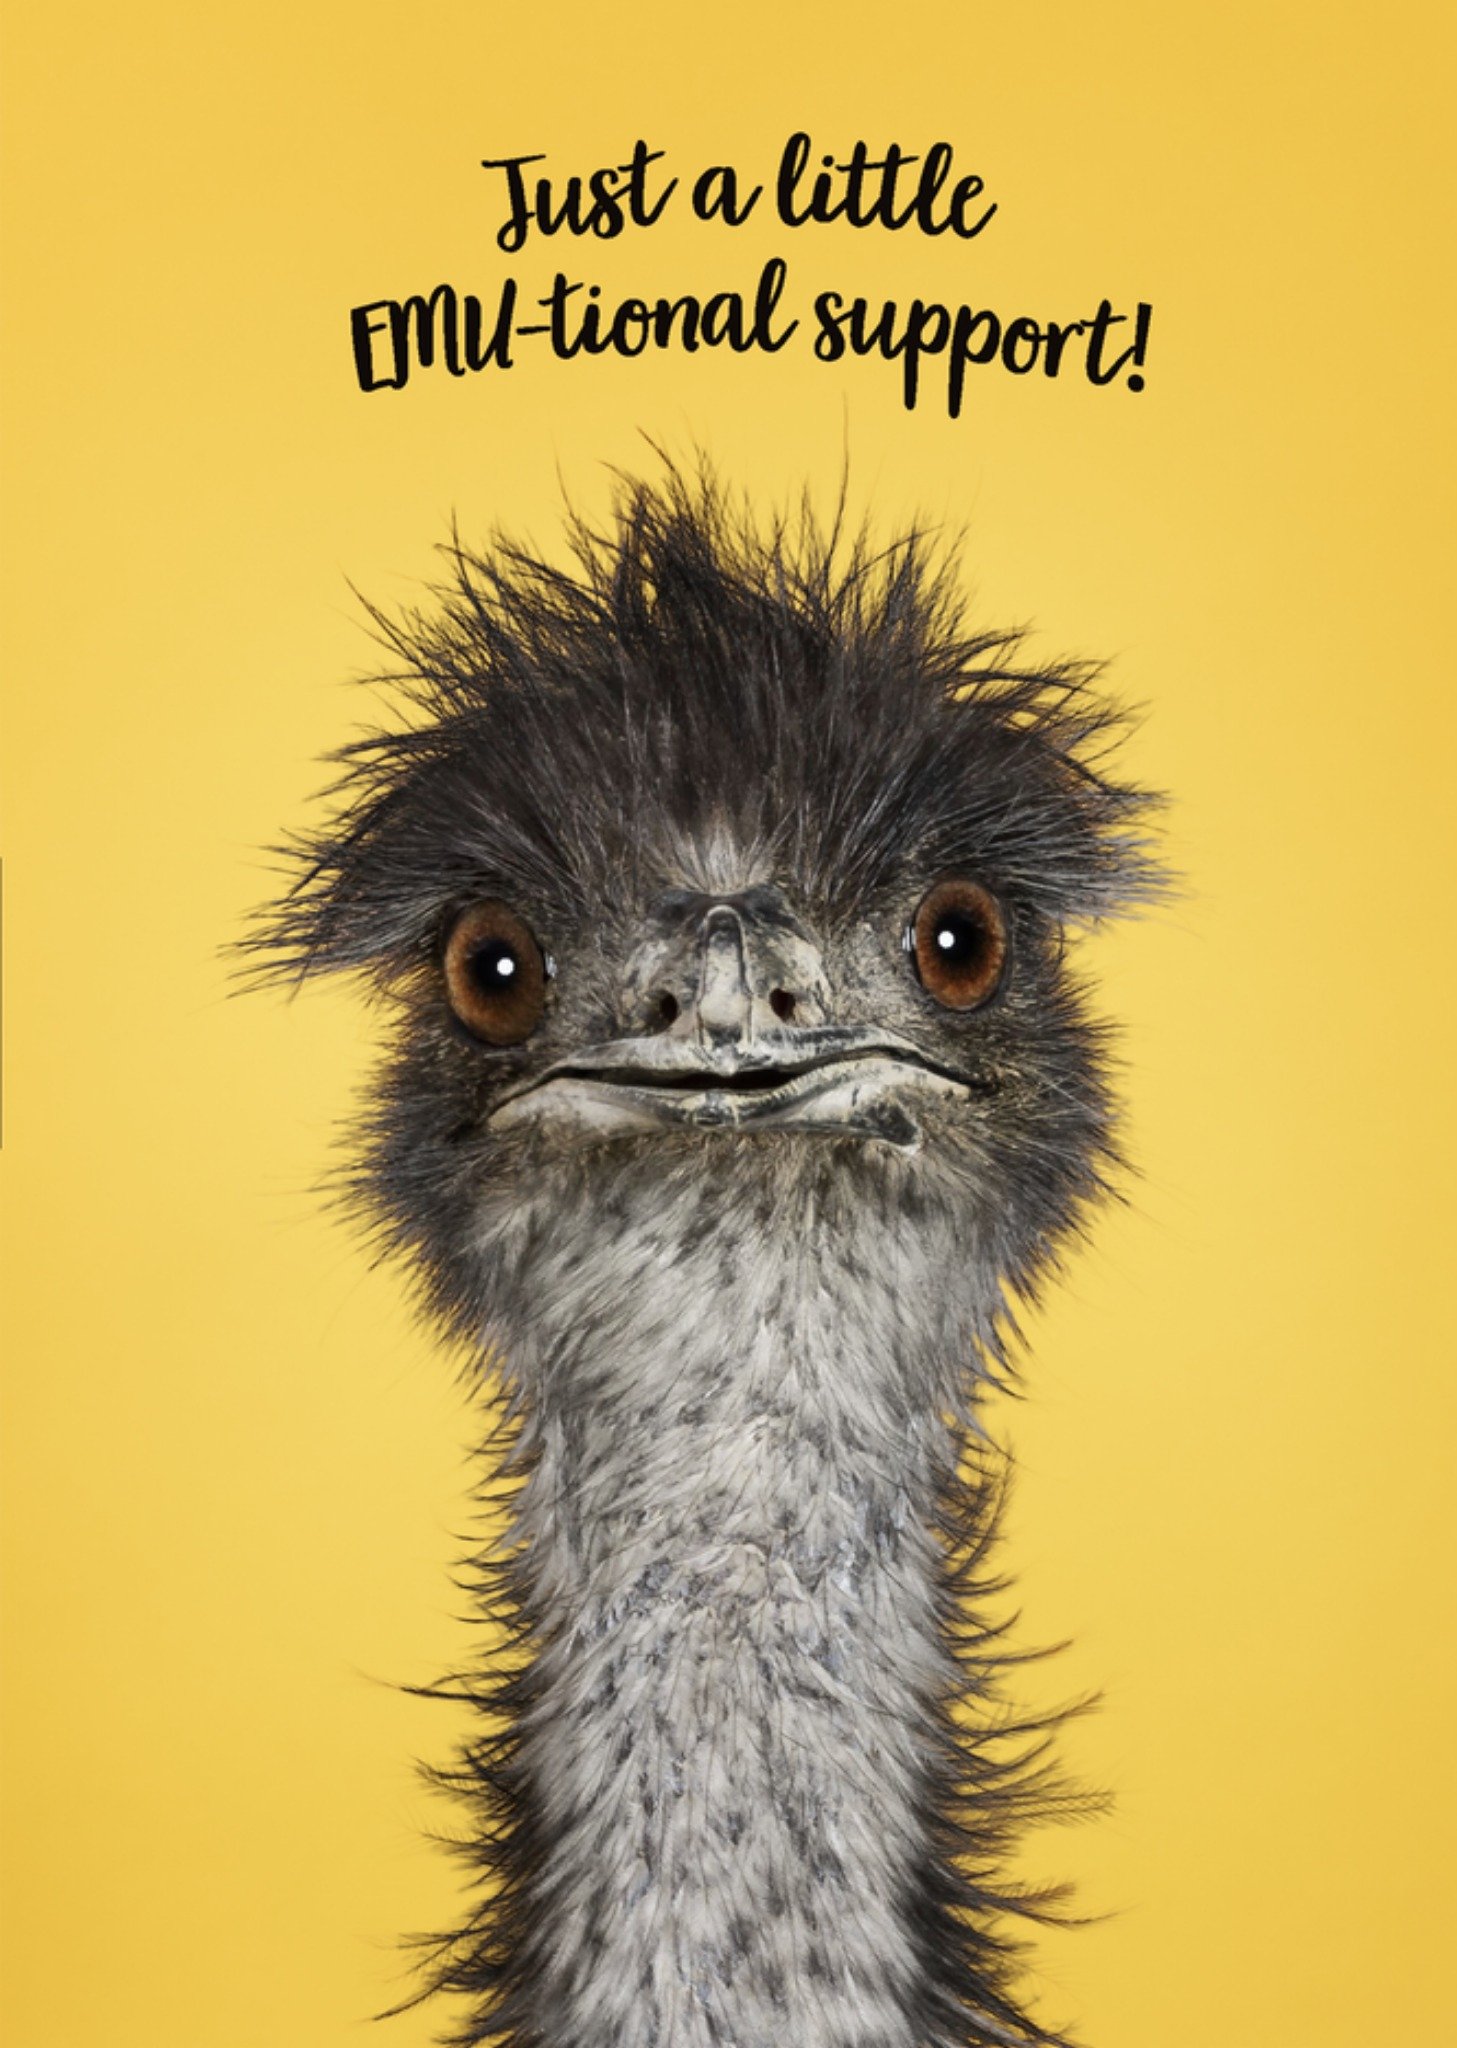 Catchy Images - Zomaar kaart - Emu-tional support